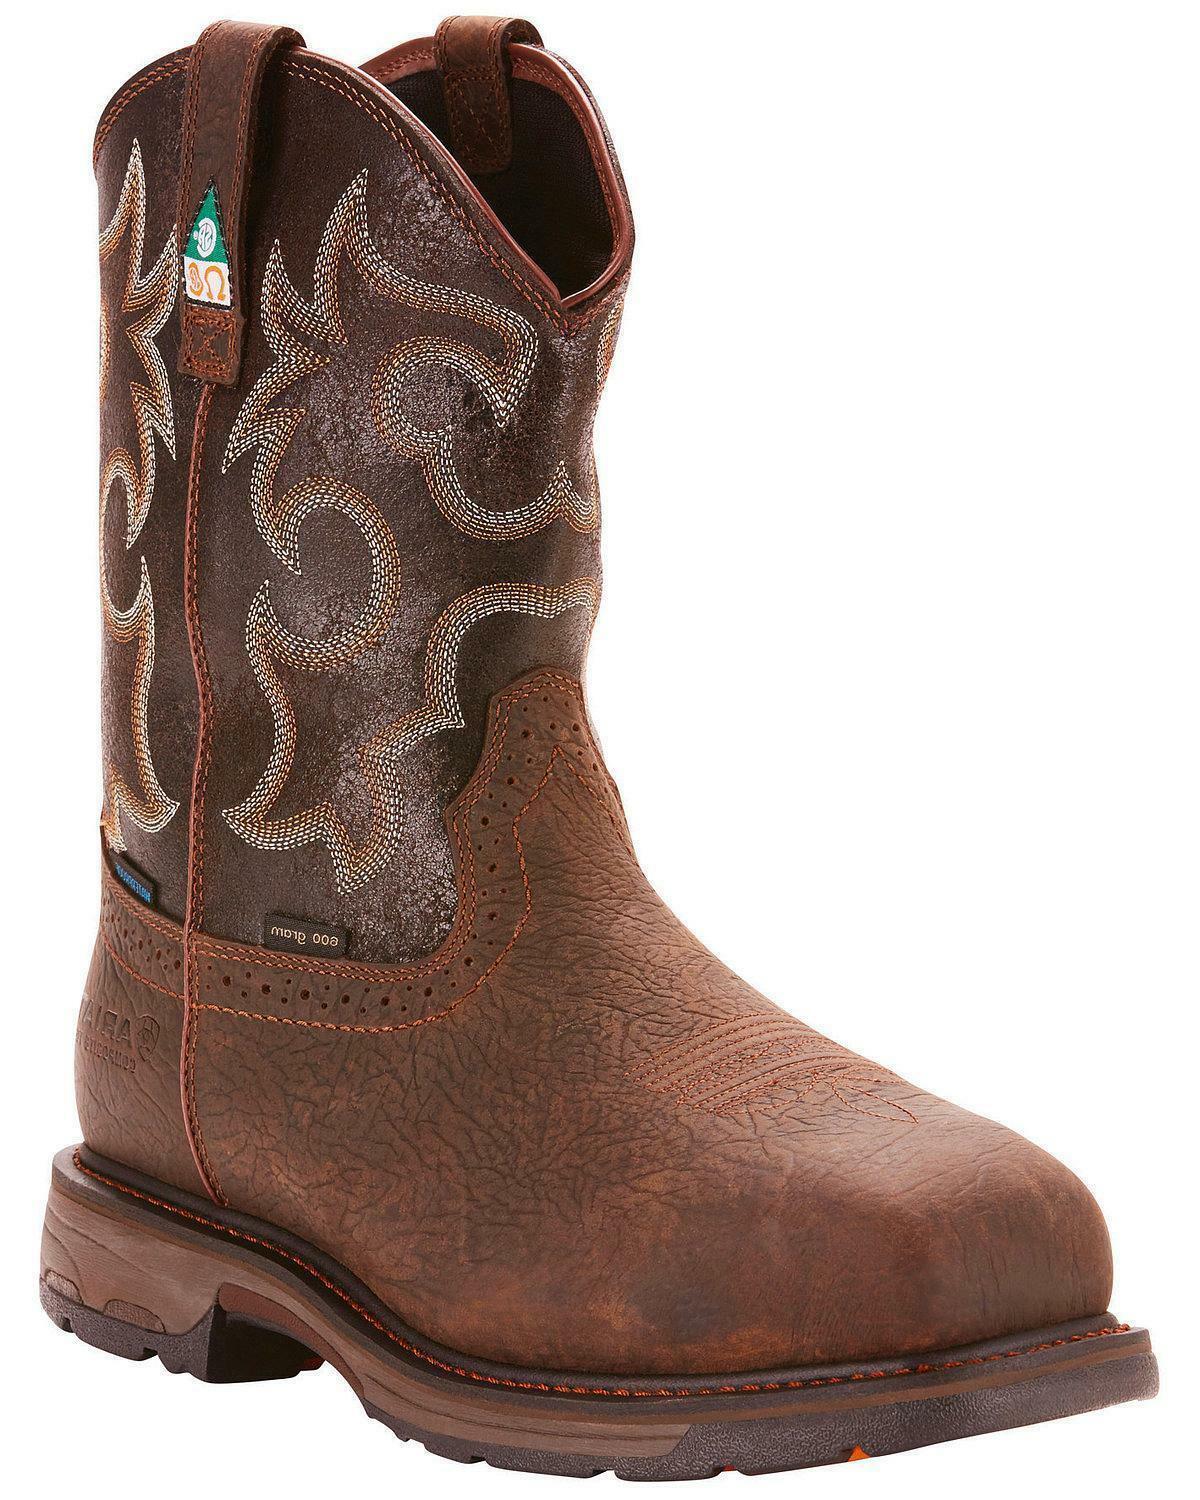 Ariat Men's Workhog H20 Insulated Comp Toe Work Boots